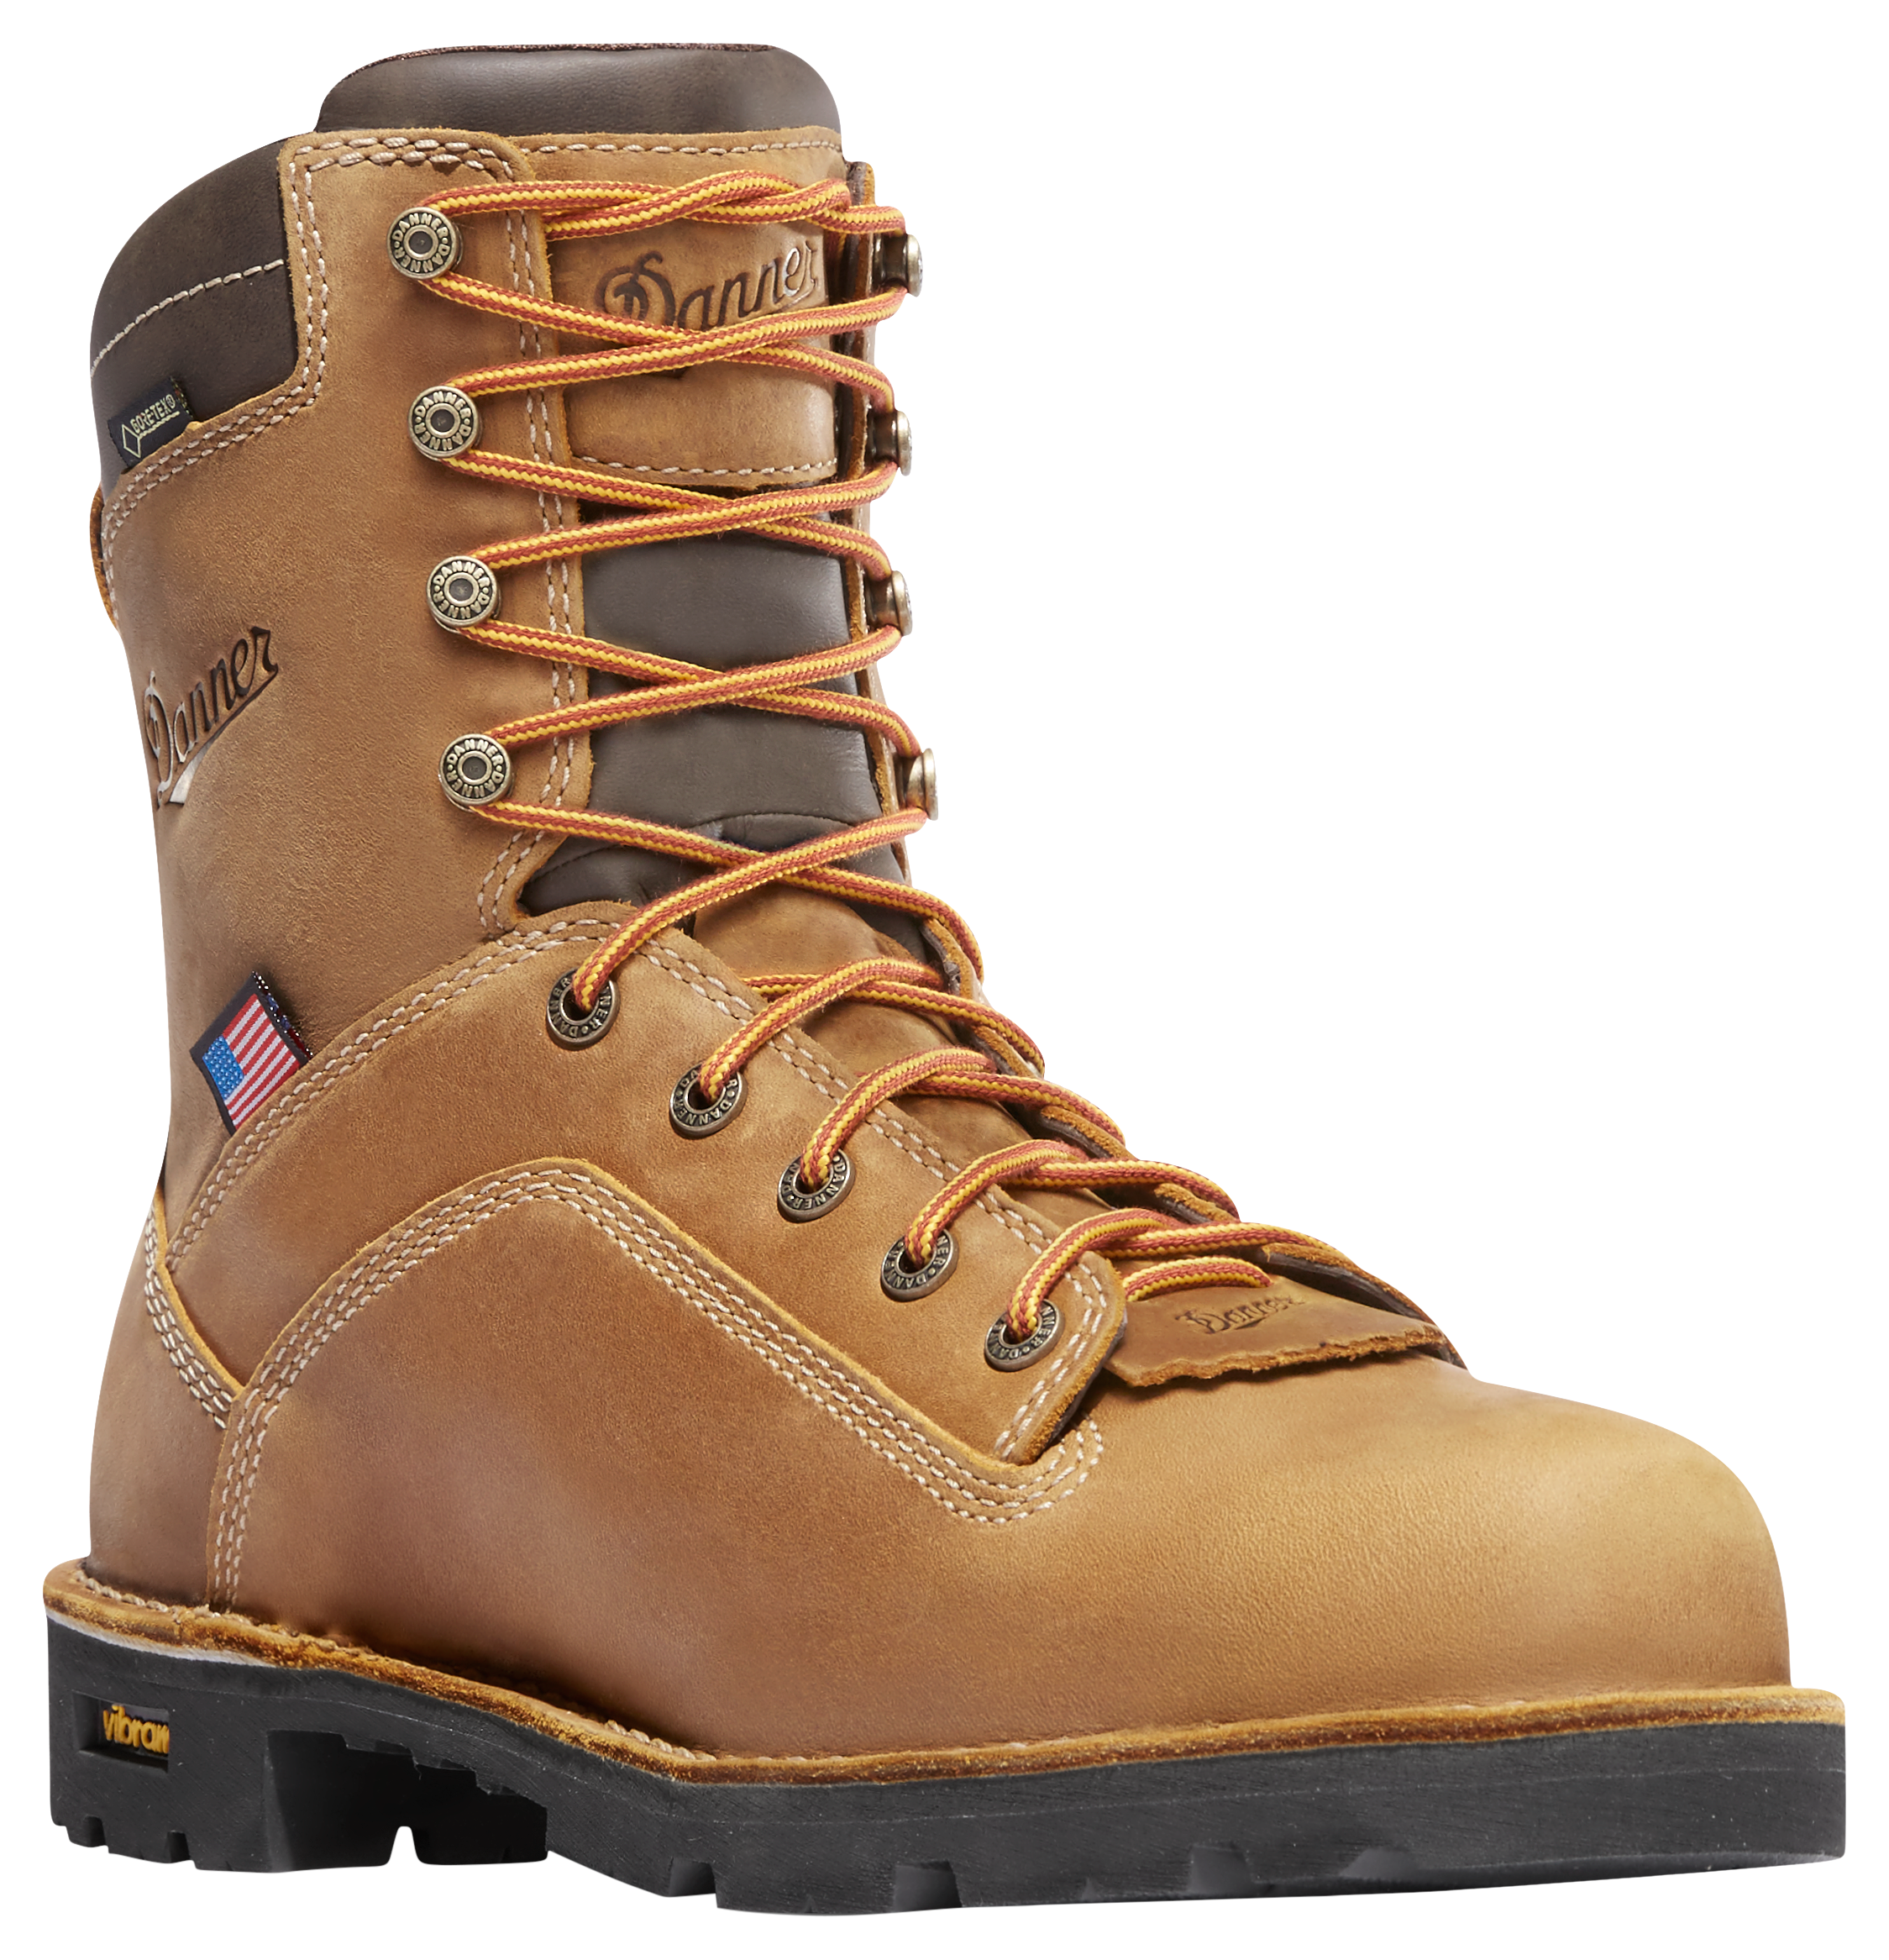 Danner Quarry USA GORE-TEX Insulated Composite Toe Work Boots for Men - Distressed Brown -  8.5W